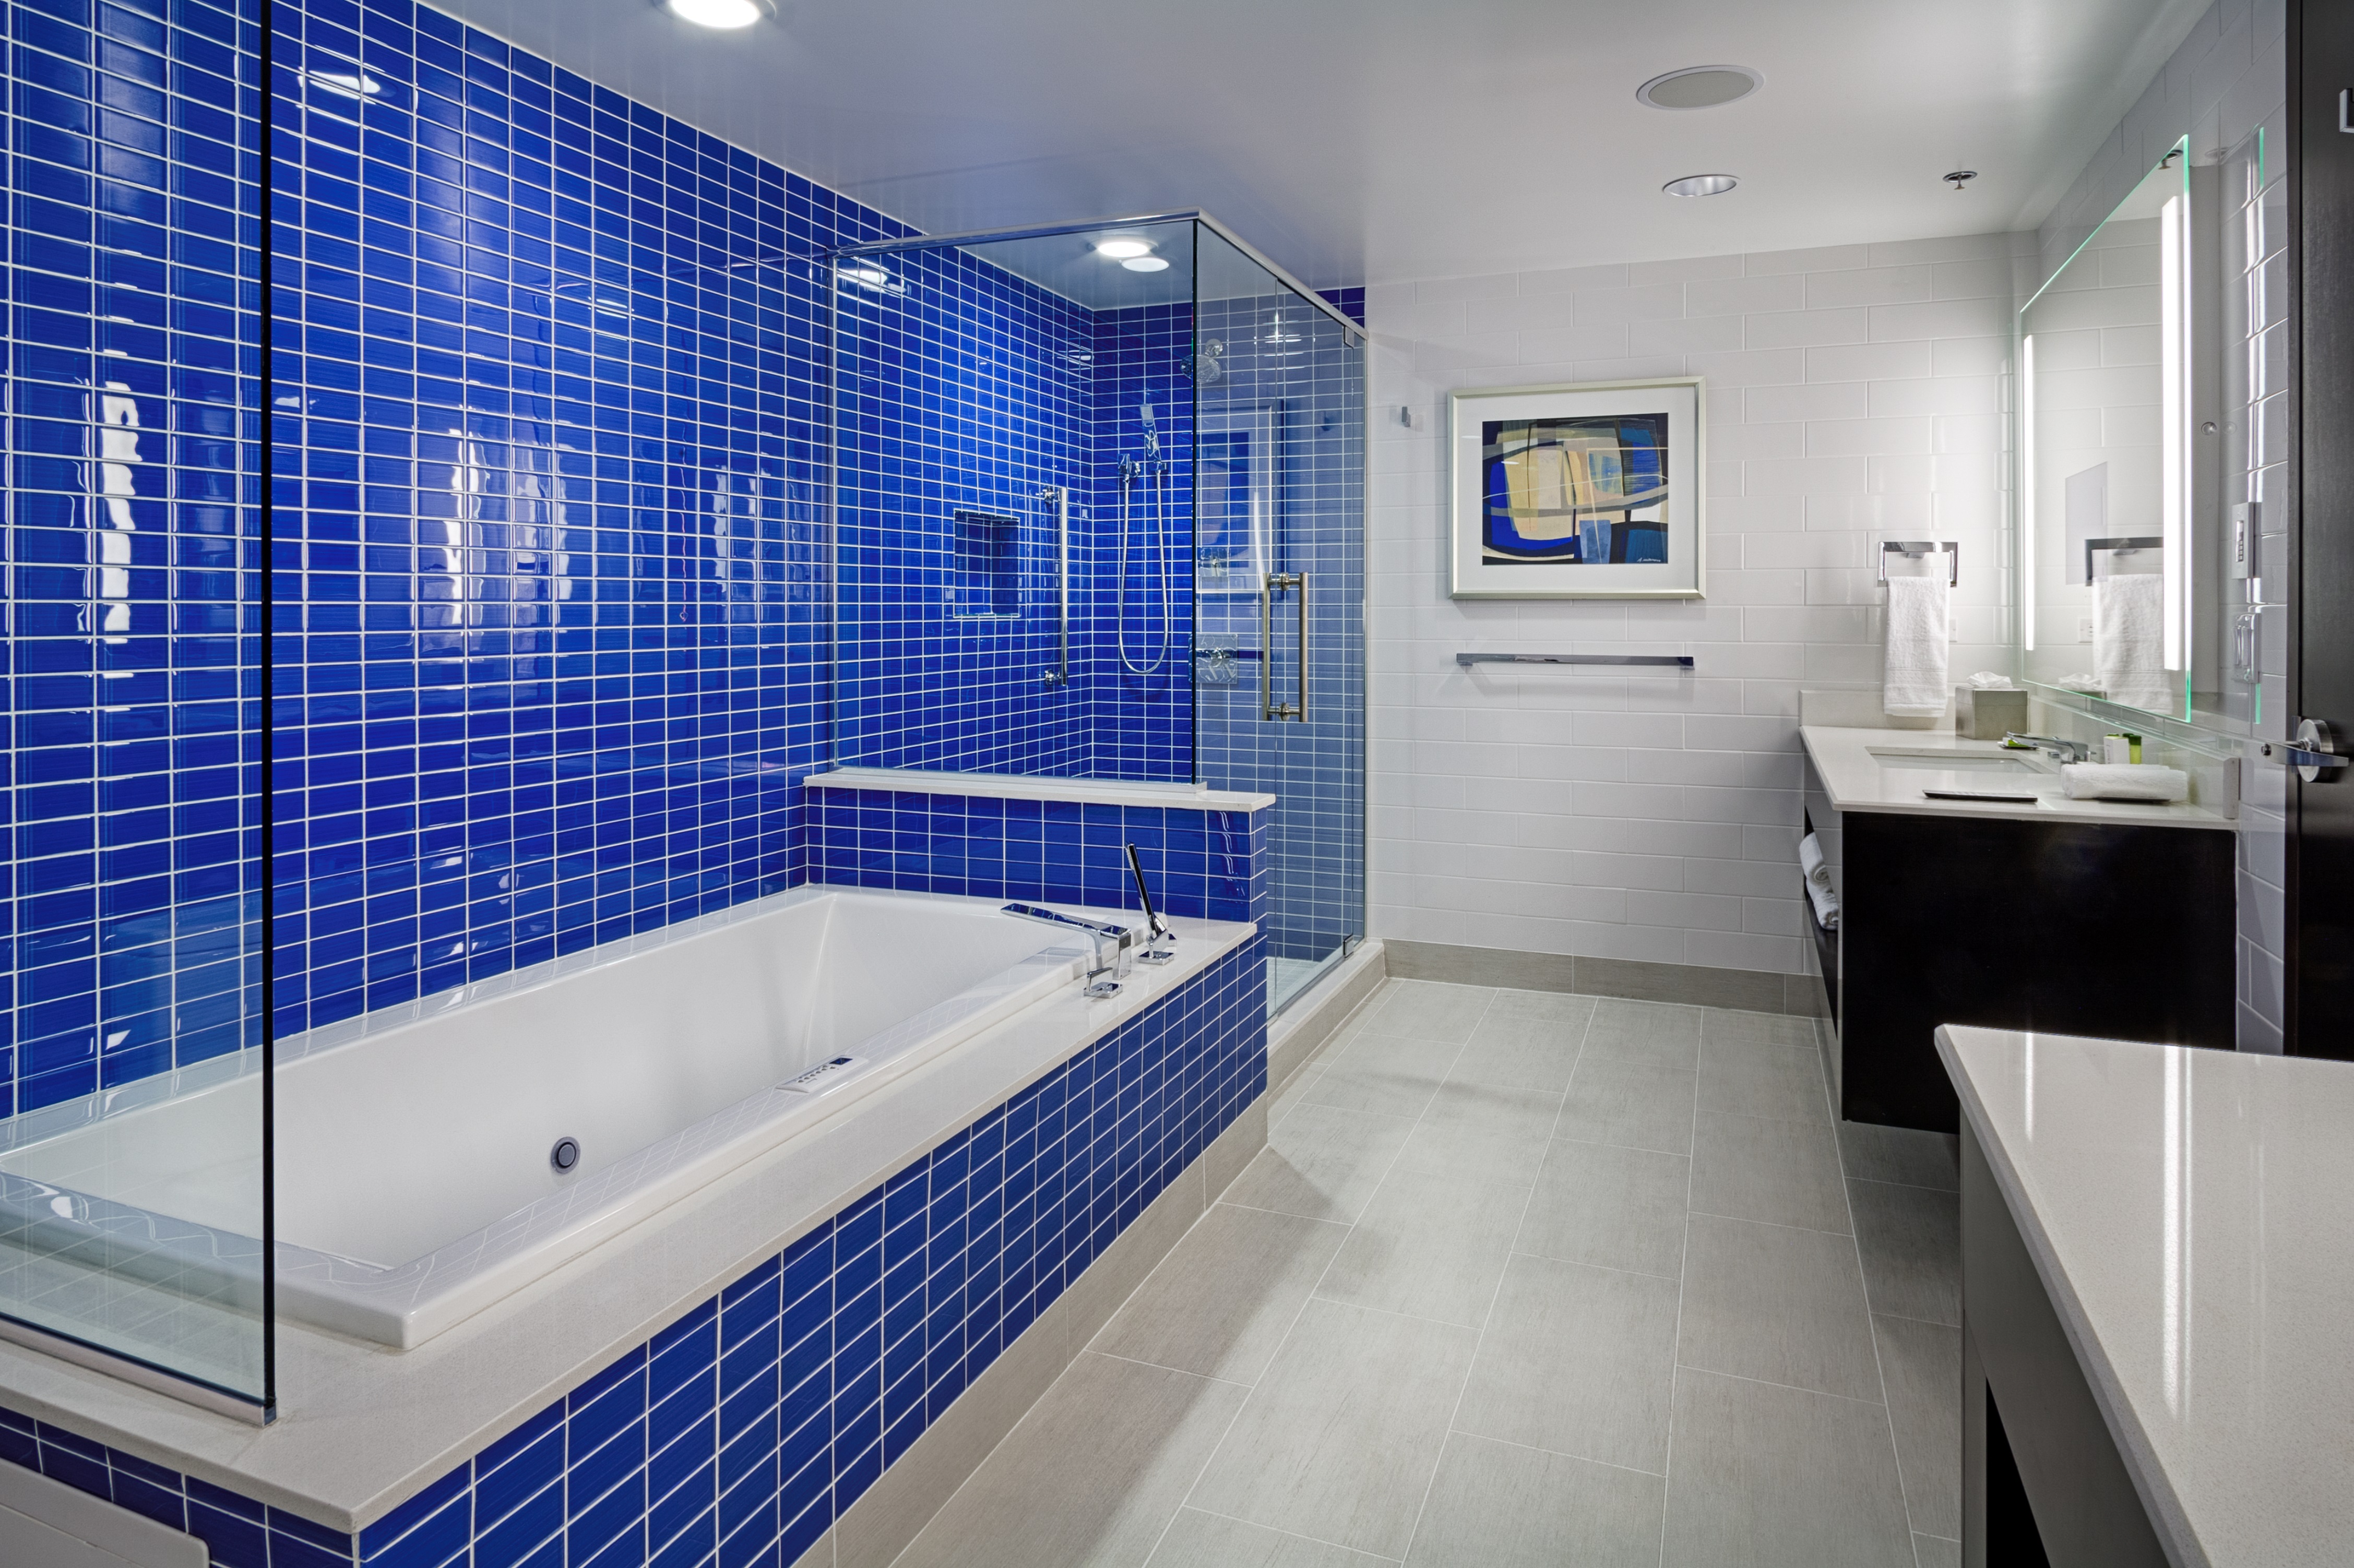 Bathroom With Blue Tile Surrounding Large Tub and Shower With Glass Door, Wall Art, Brightly Lit Vanity Mirror, Sink, Fresh Towels, and Amenities